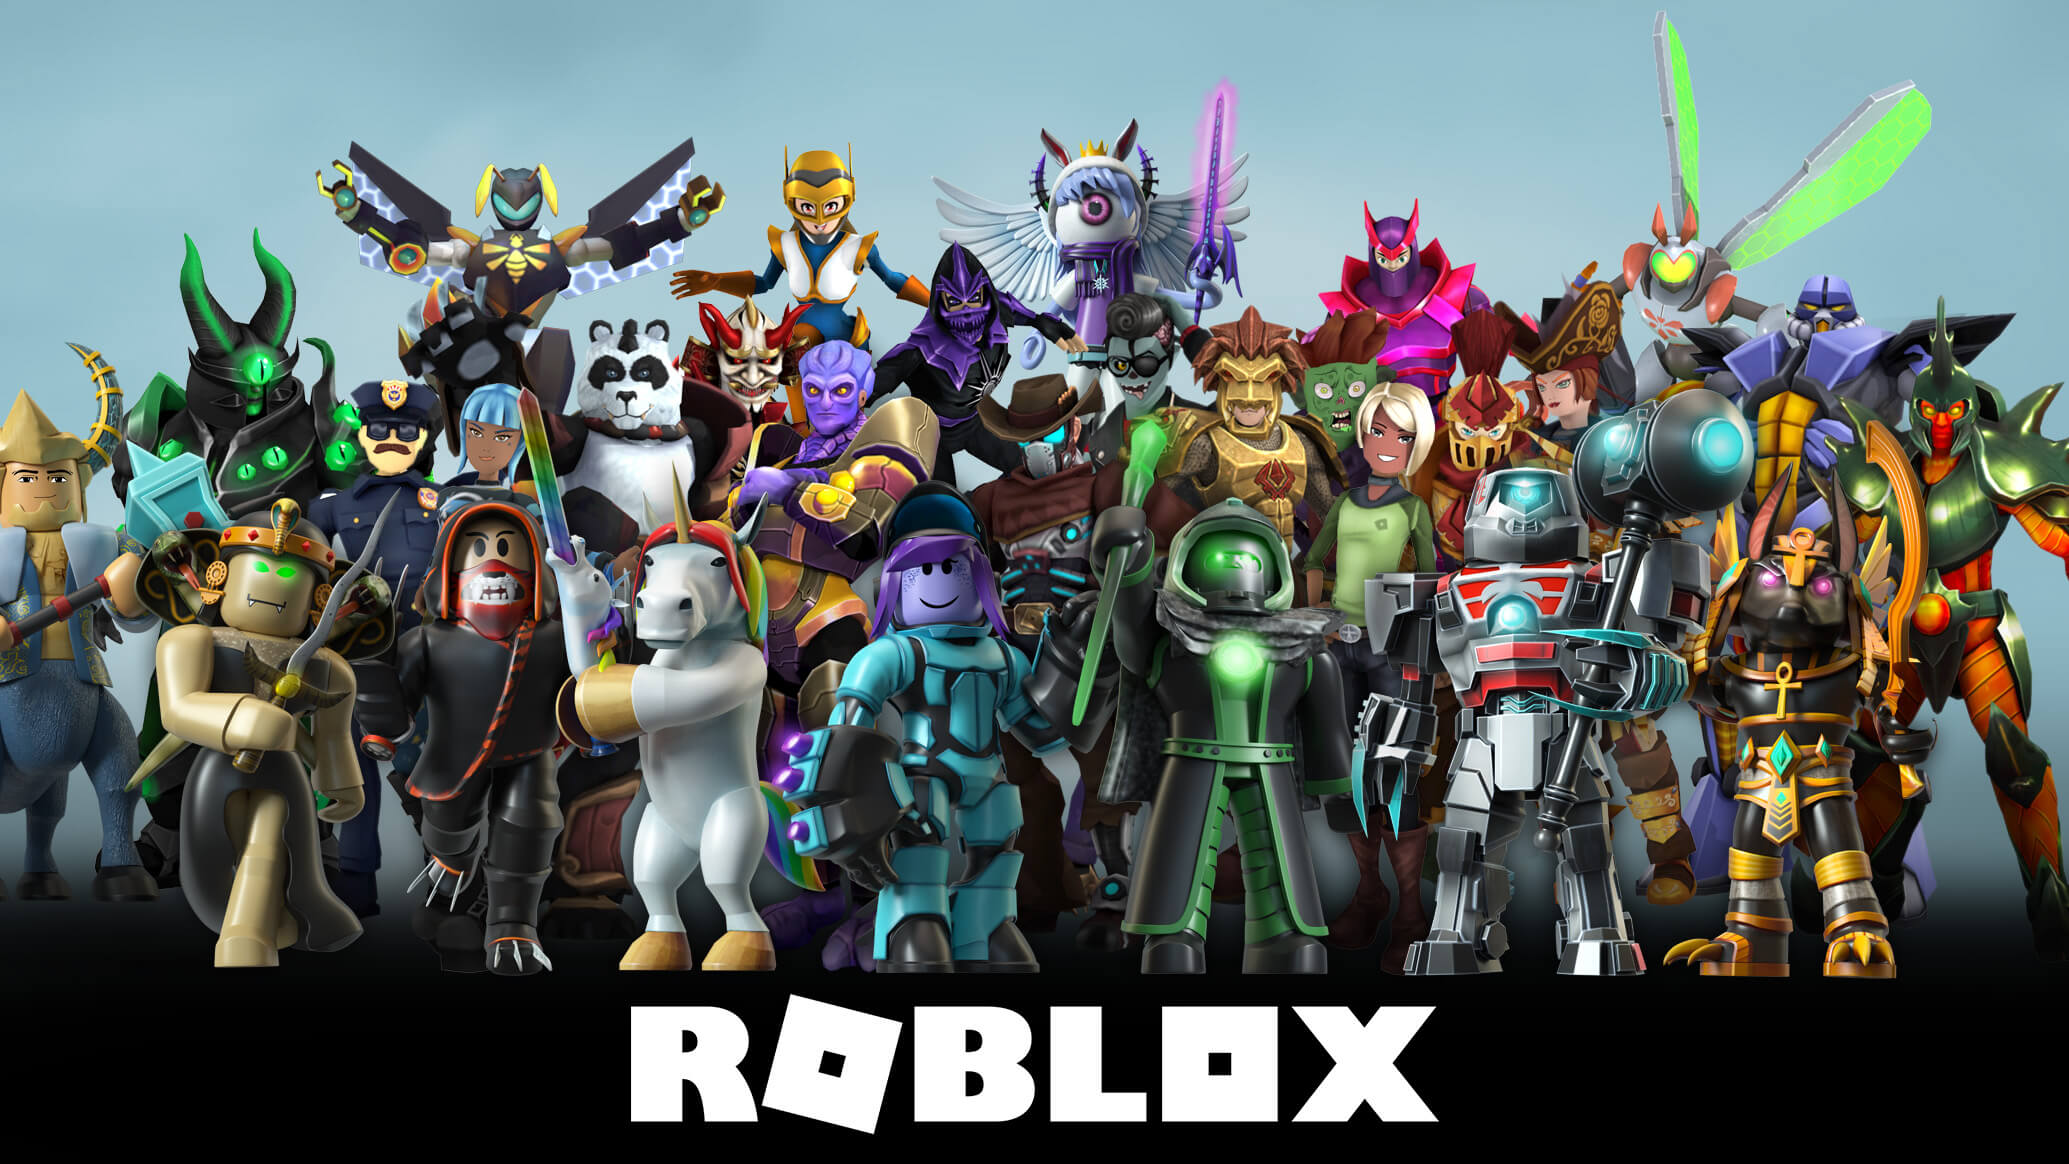 Roblox Users Being Warned About Free Robux Scams - dora creates a free robux scam